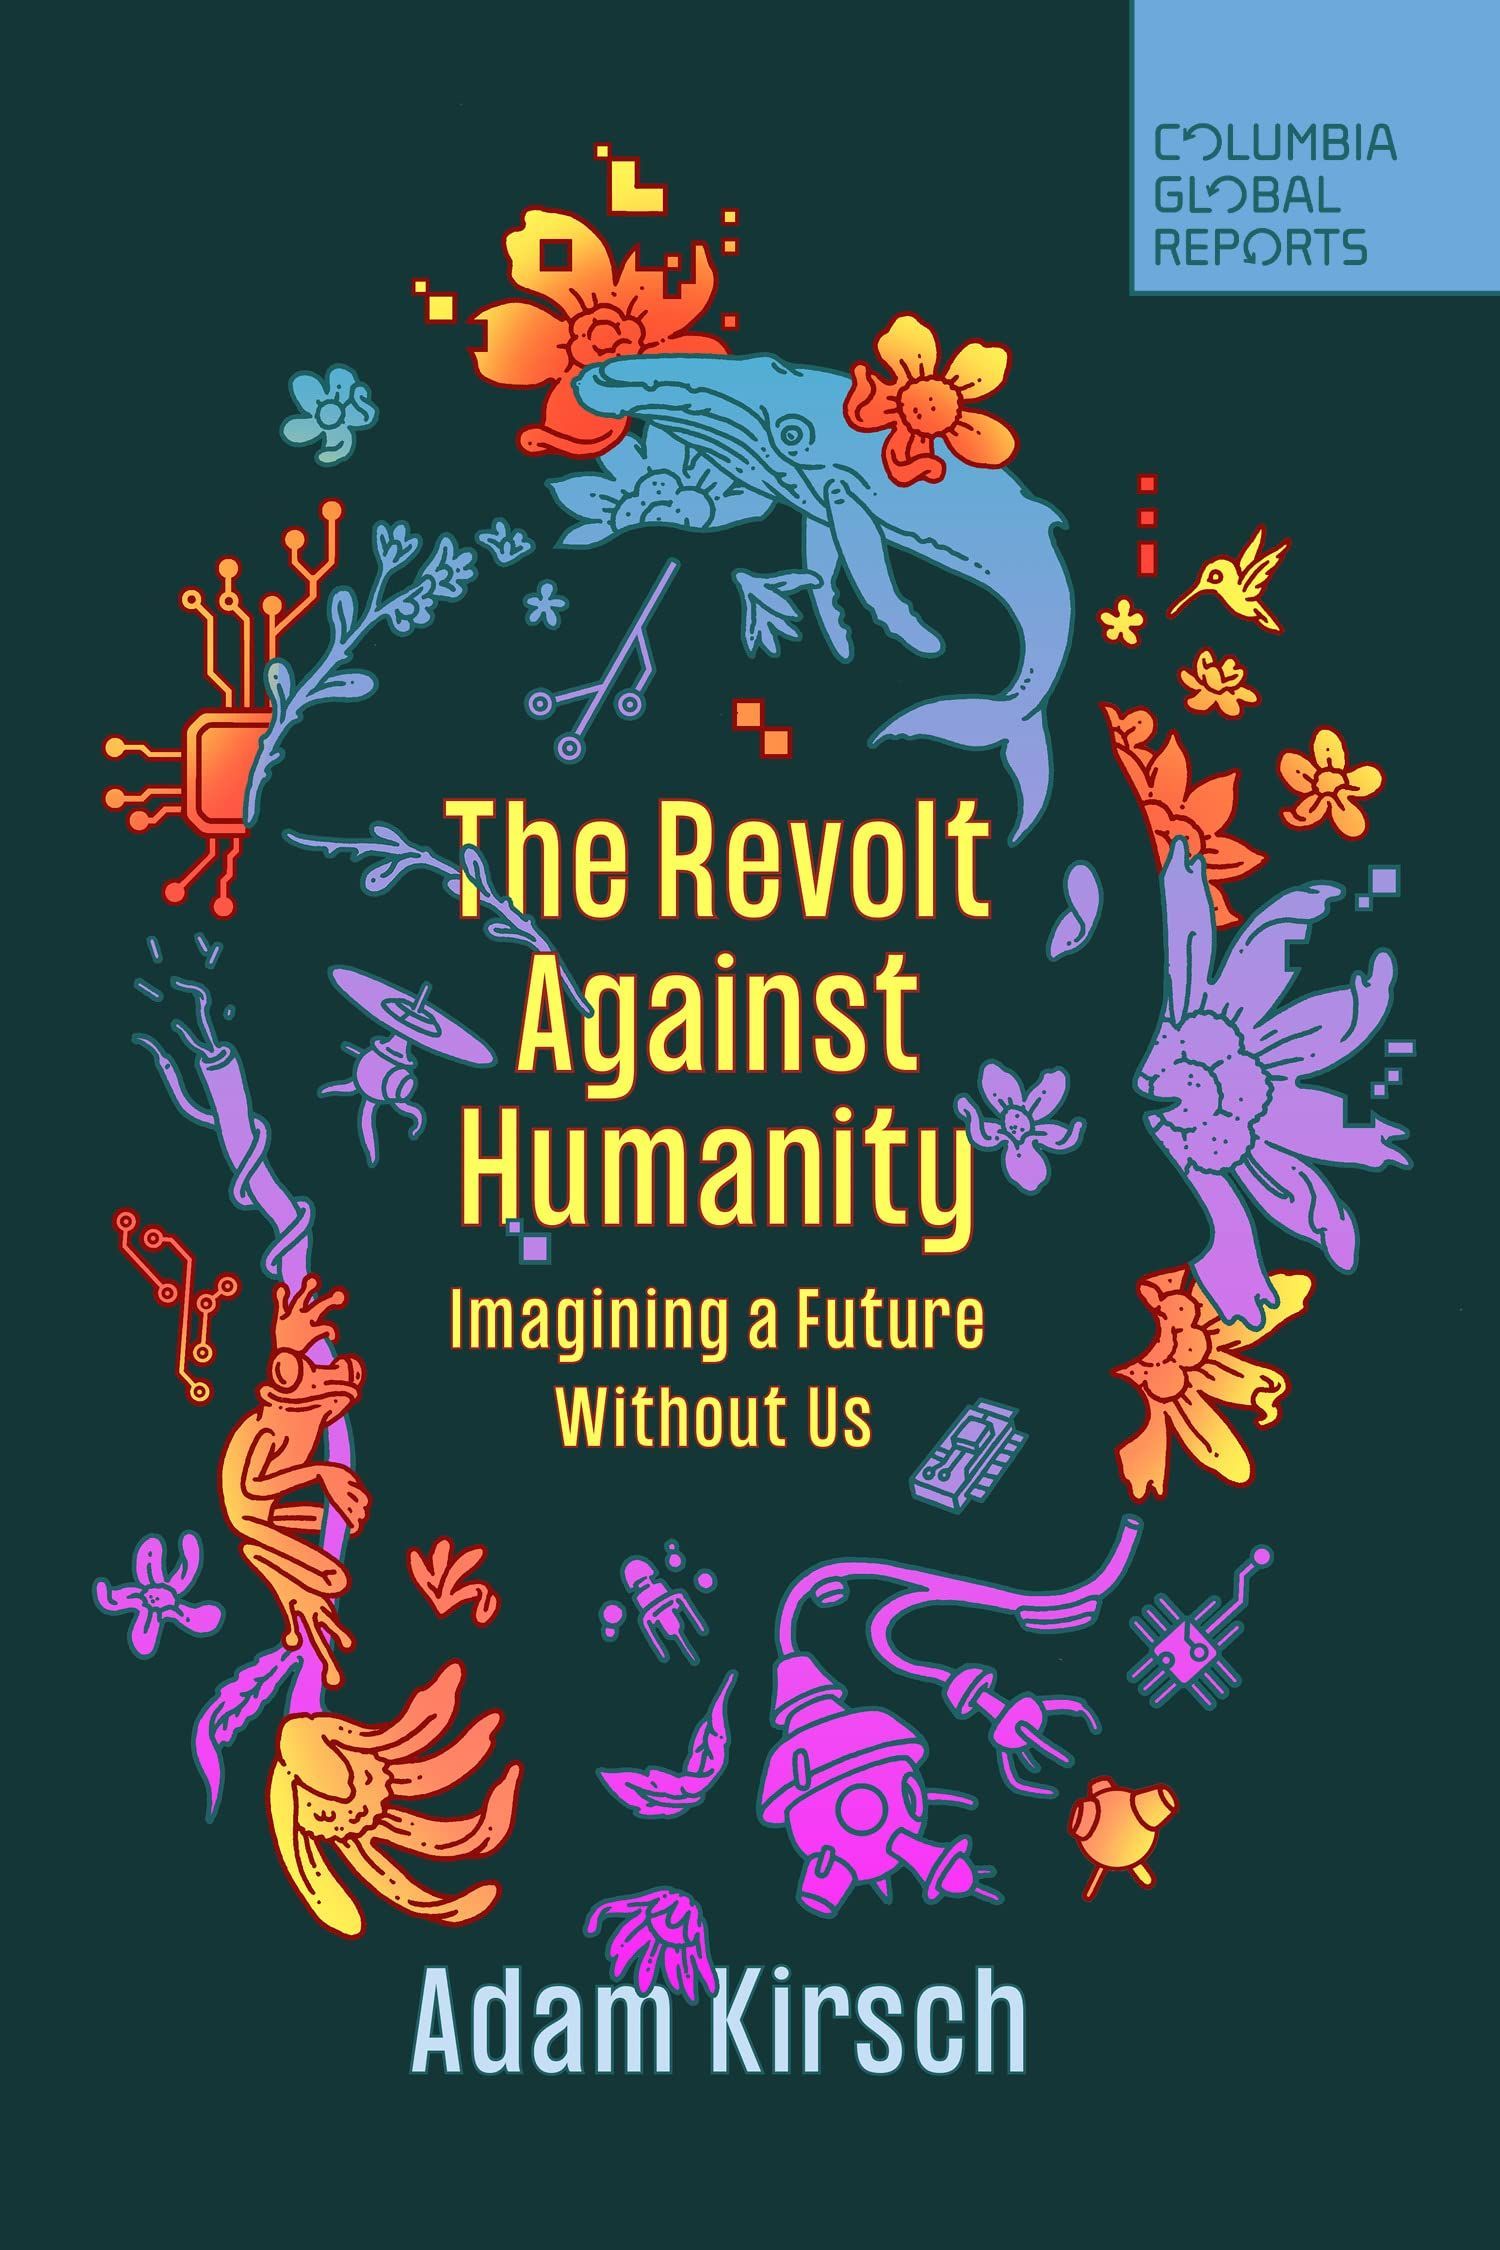 A World Beyond Us: On Adam Kirsch’s “The Revolt Against Humanity”